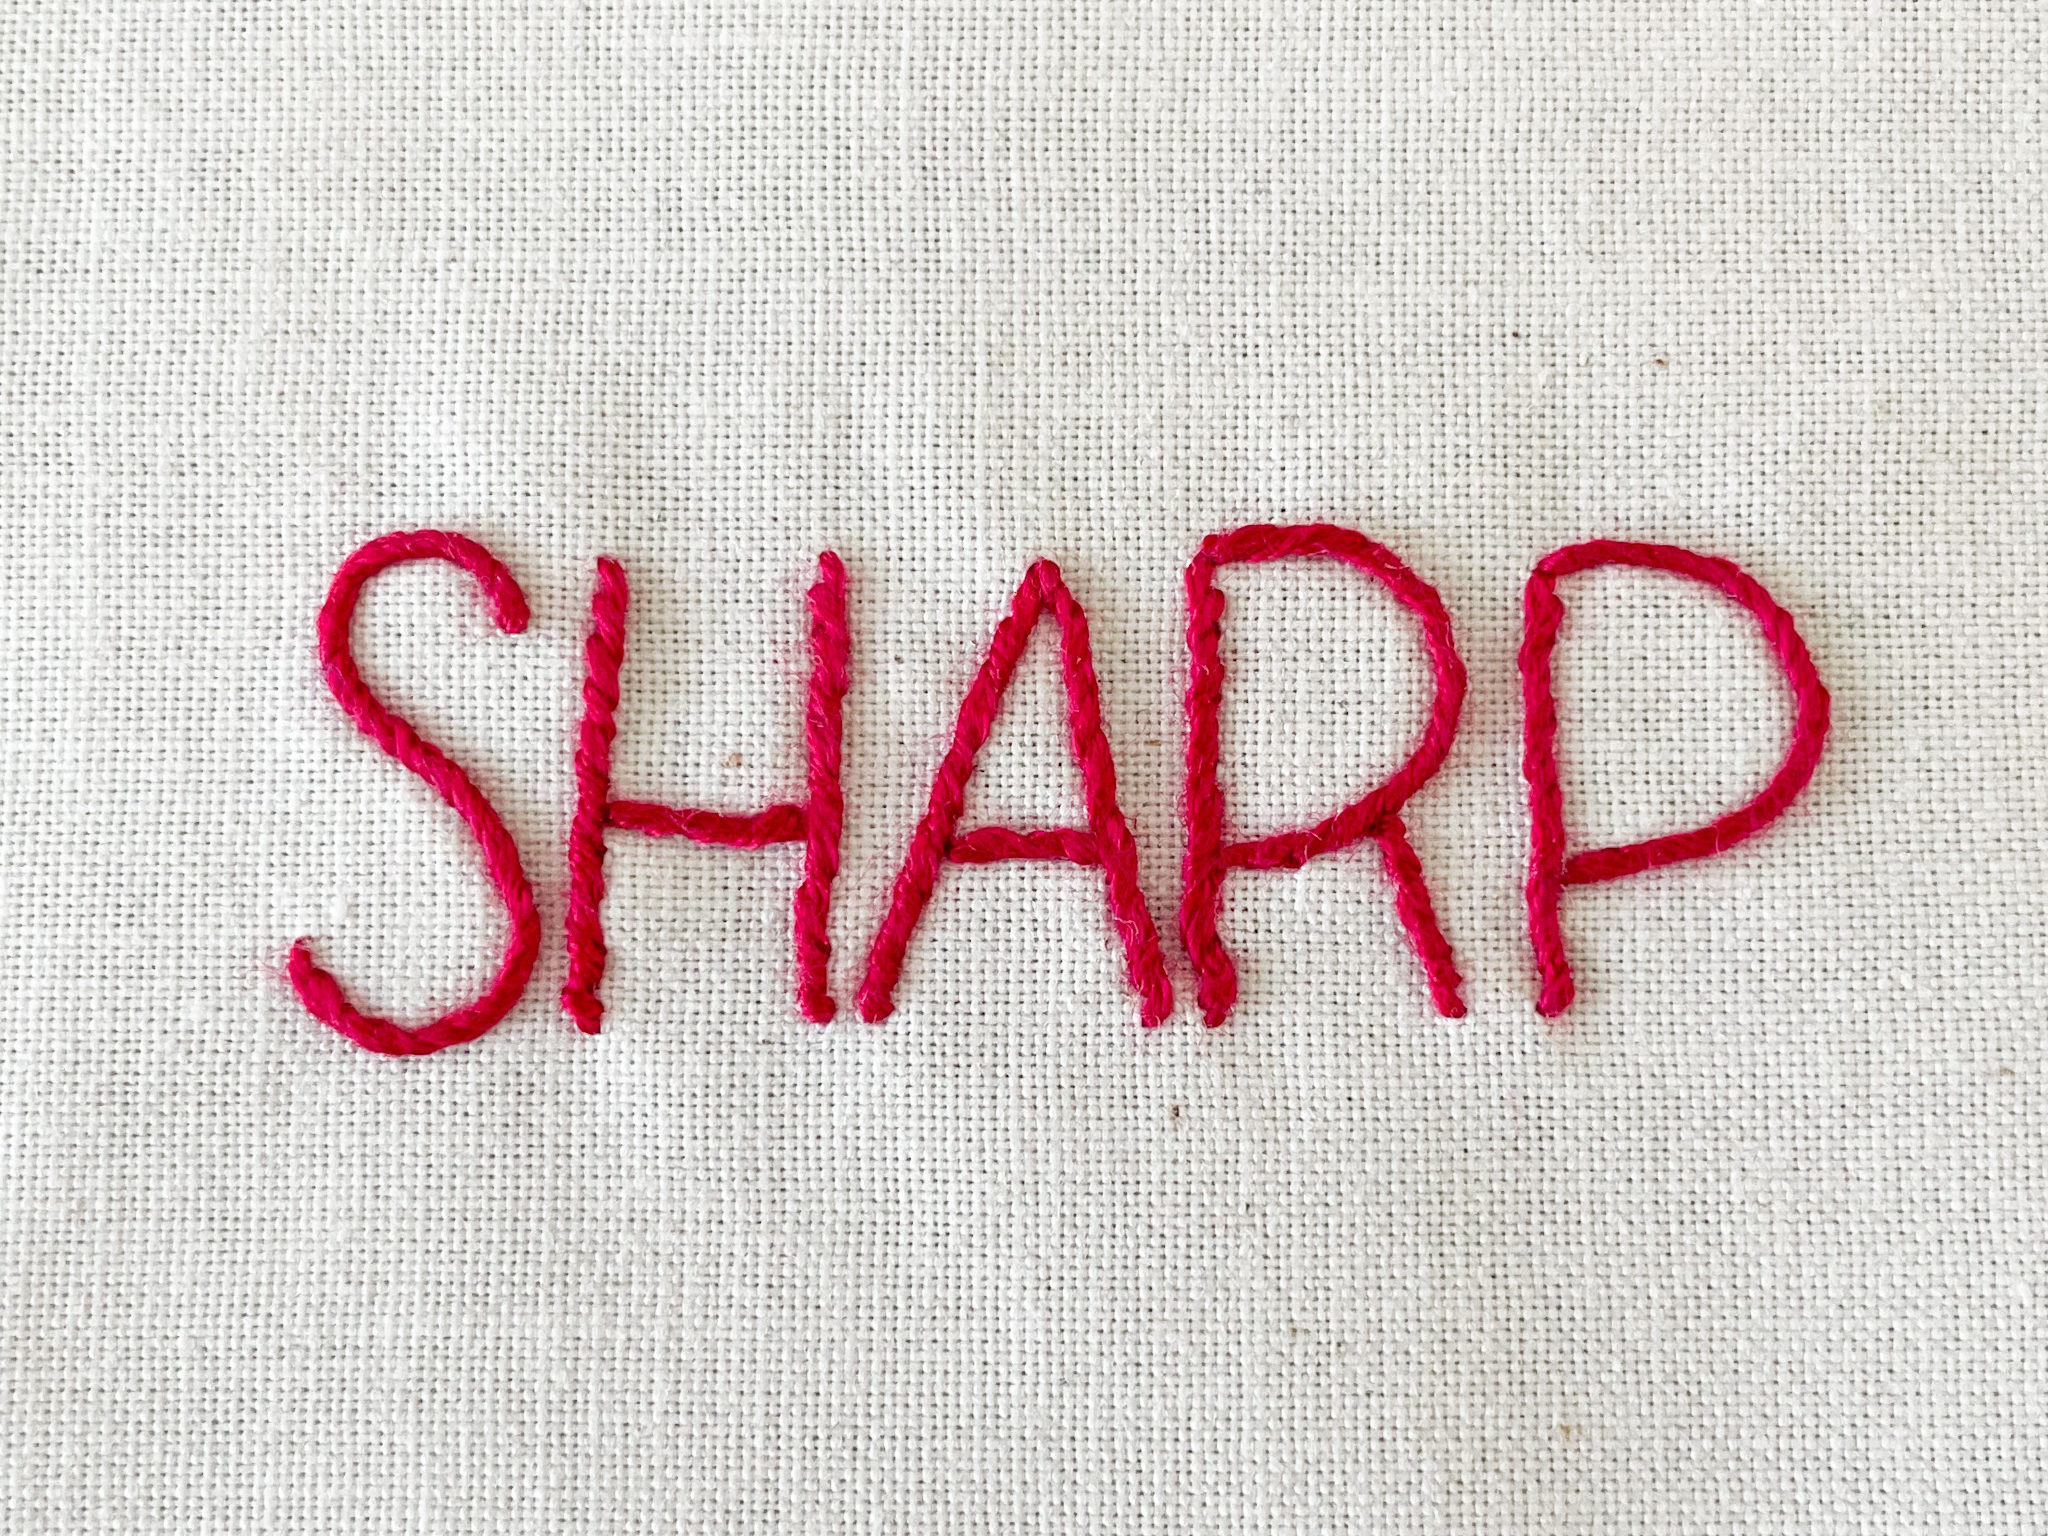 The word "sharp" stitched on fabric.